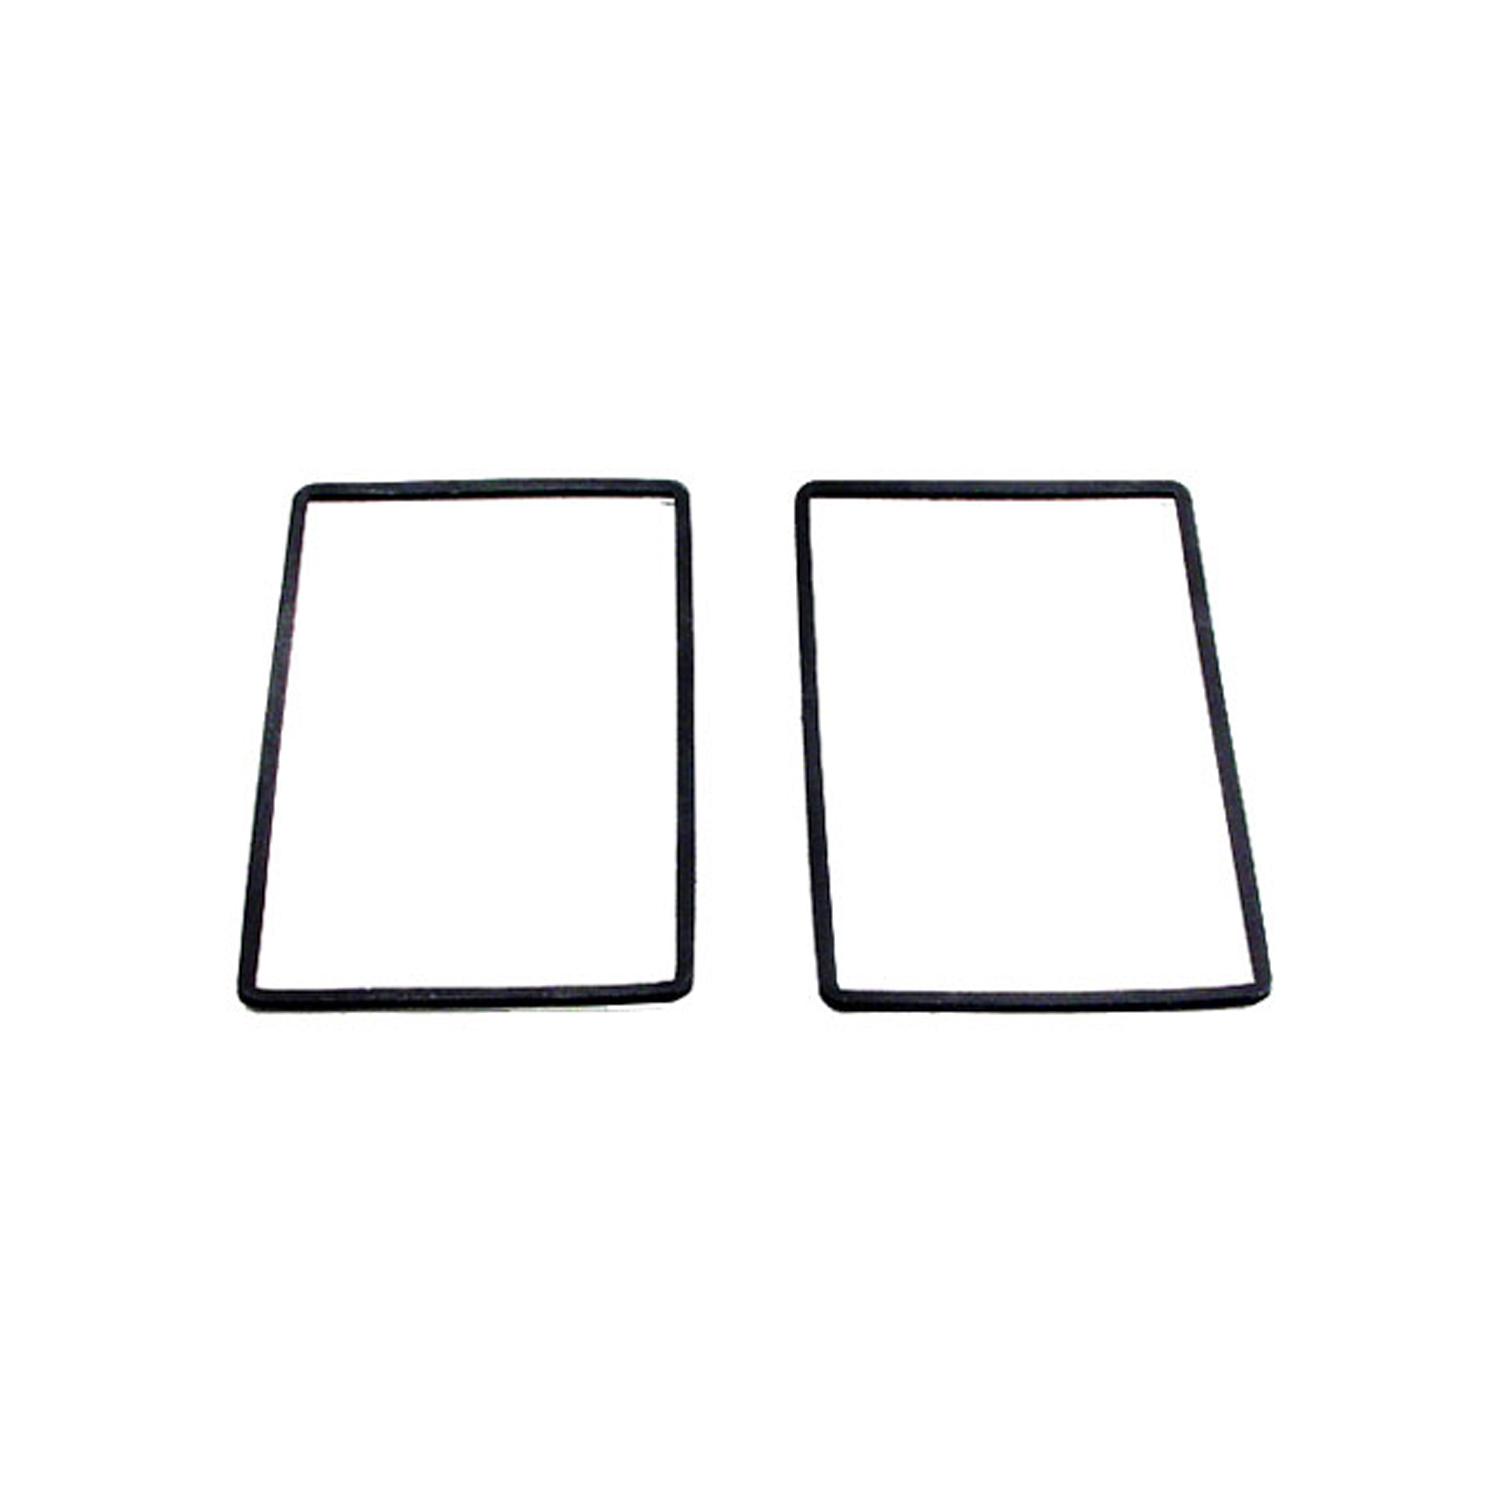 1953 Willys Station Wagon Tail-light Bezel Lens Gaskets.  2-3/4 X 2-5/16.  Pair-LG 9600-120